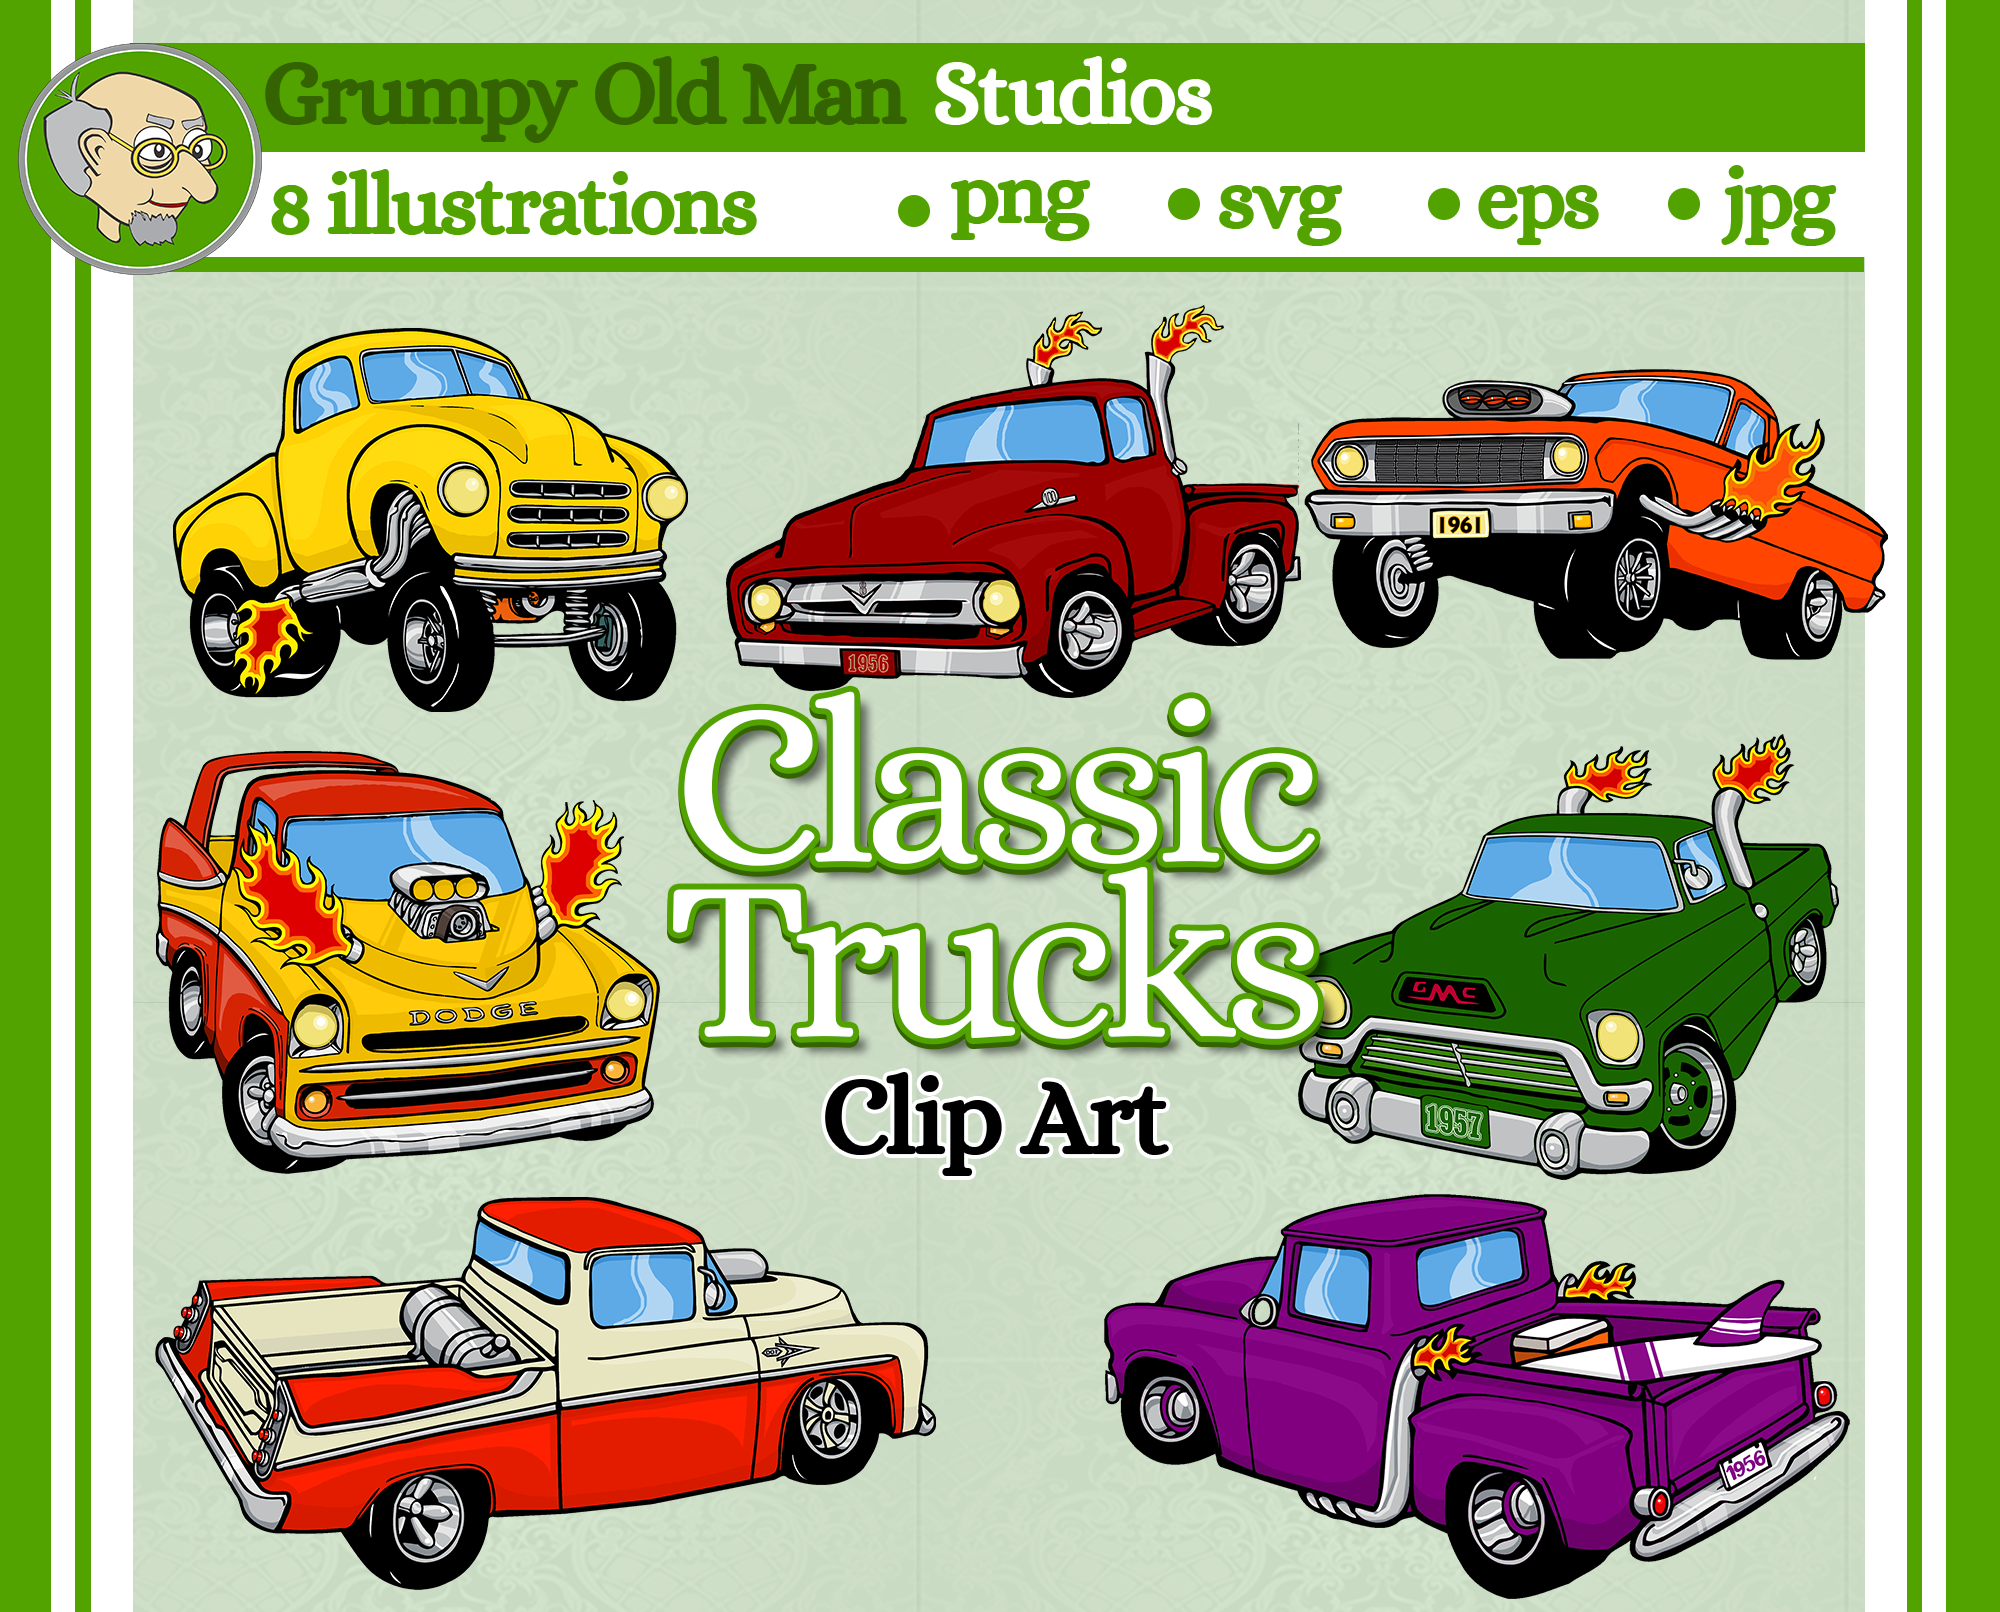 Download Classic Hot Rod Truck Clip Art Pack By Grumpy Old Man Studios Thehungryjpeg Com